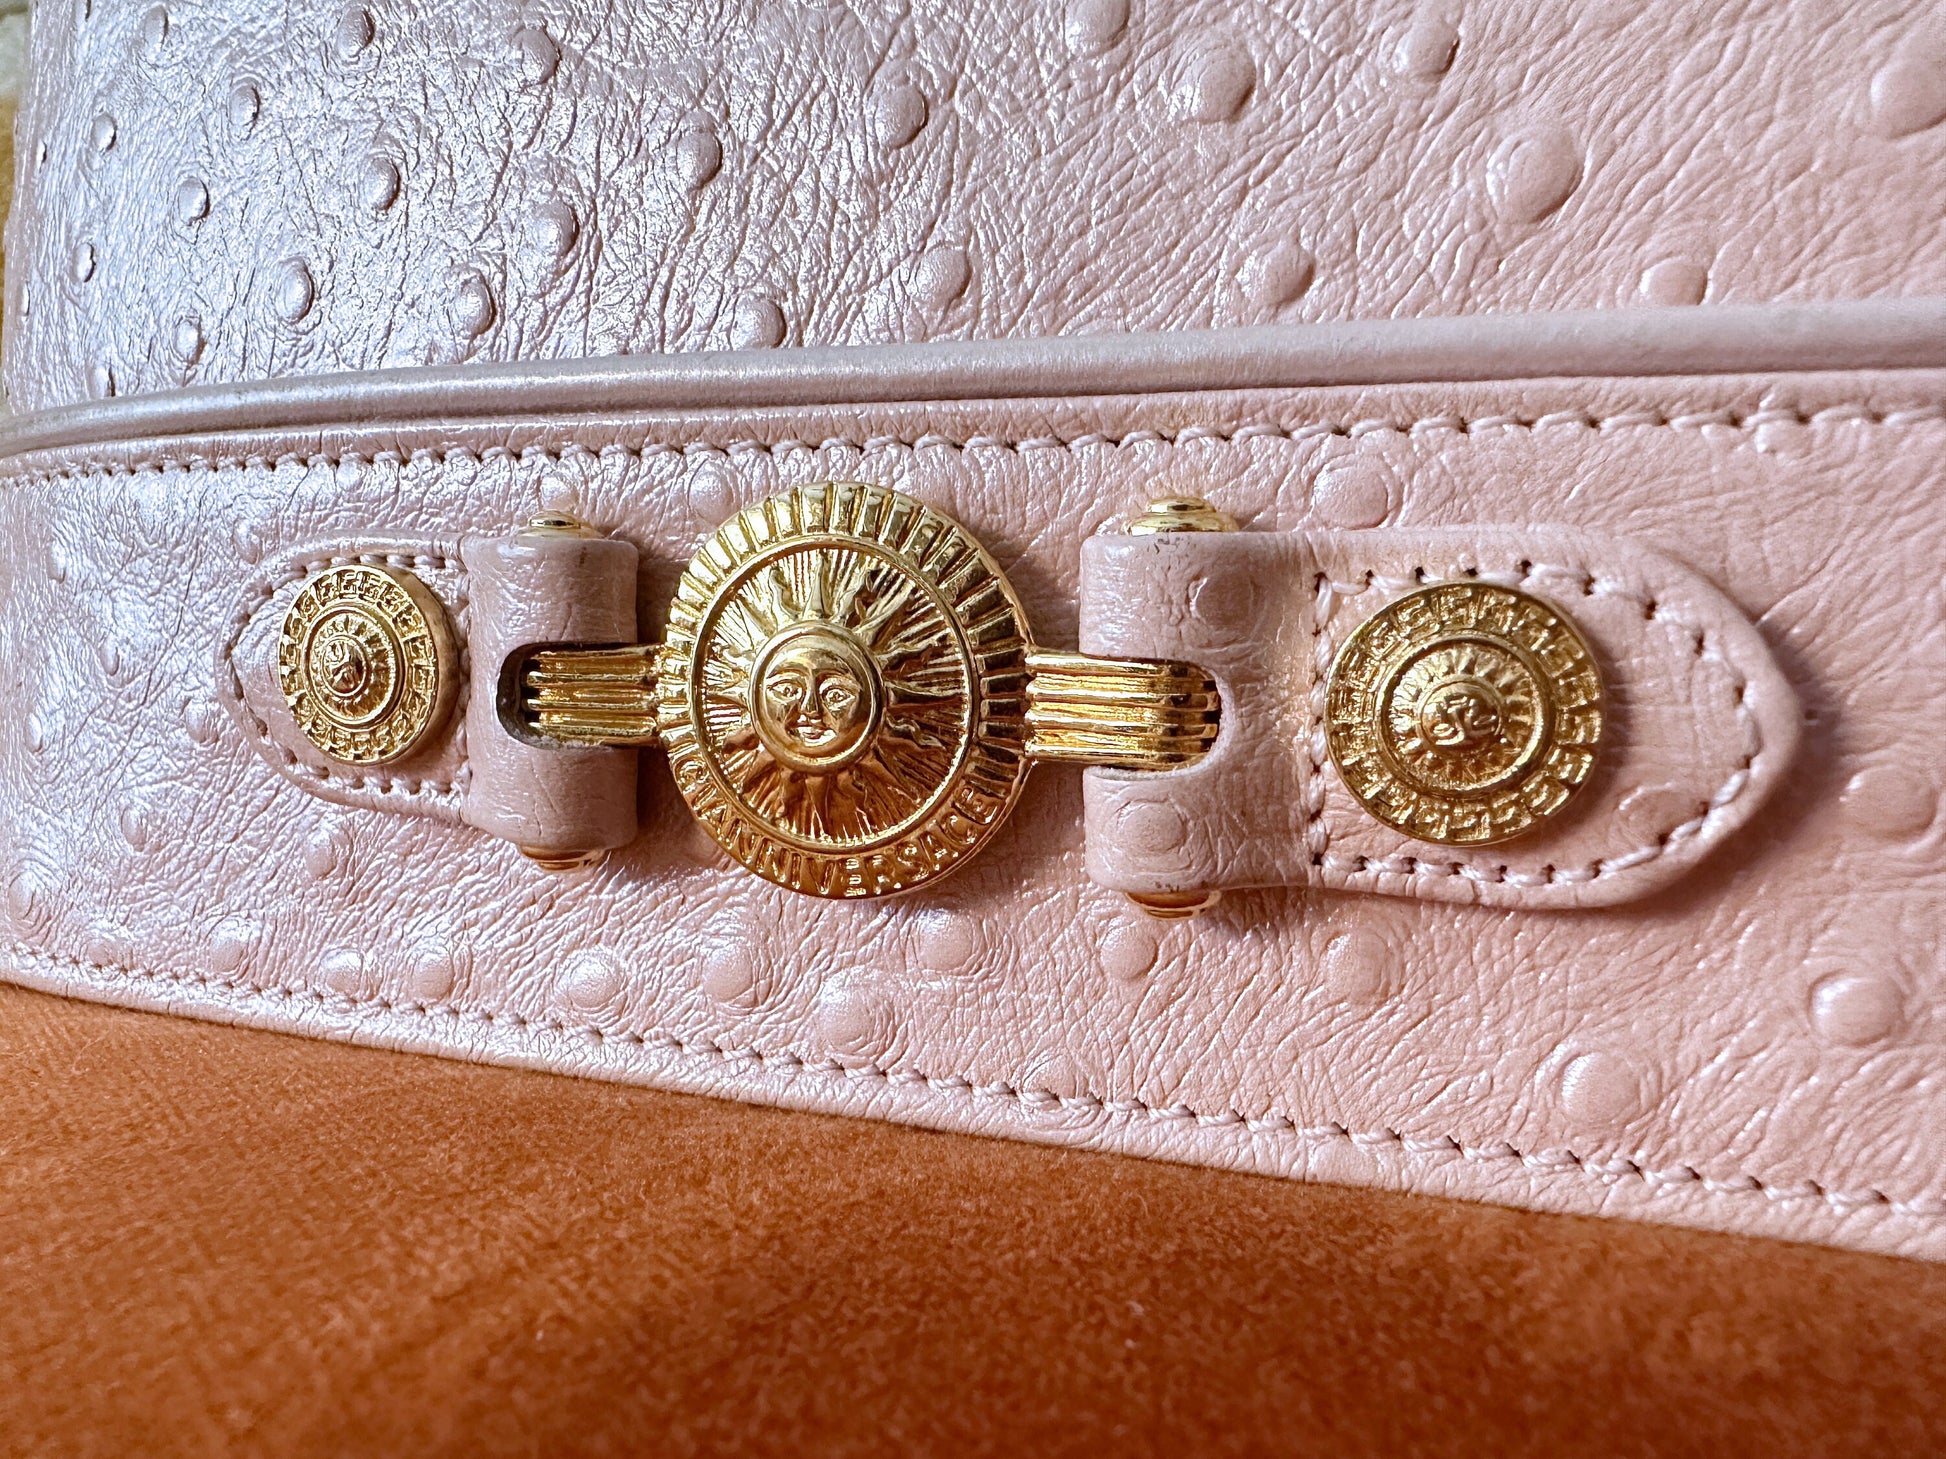 VERSACE VINTAGE 100% Authentic Genuine Ostrich Leather Makeup Case Bag, Pastel Pink, 1990's, Great Condition, Grade AB